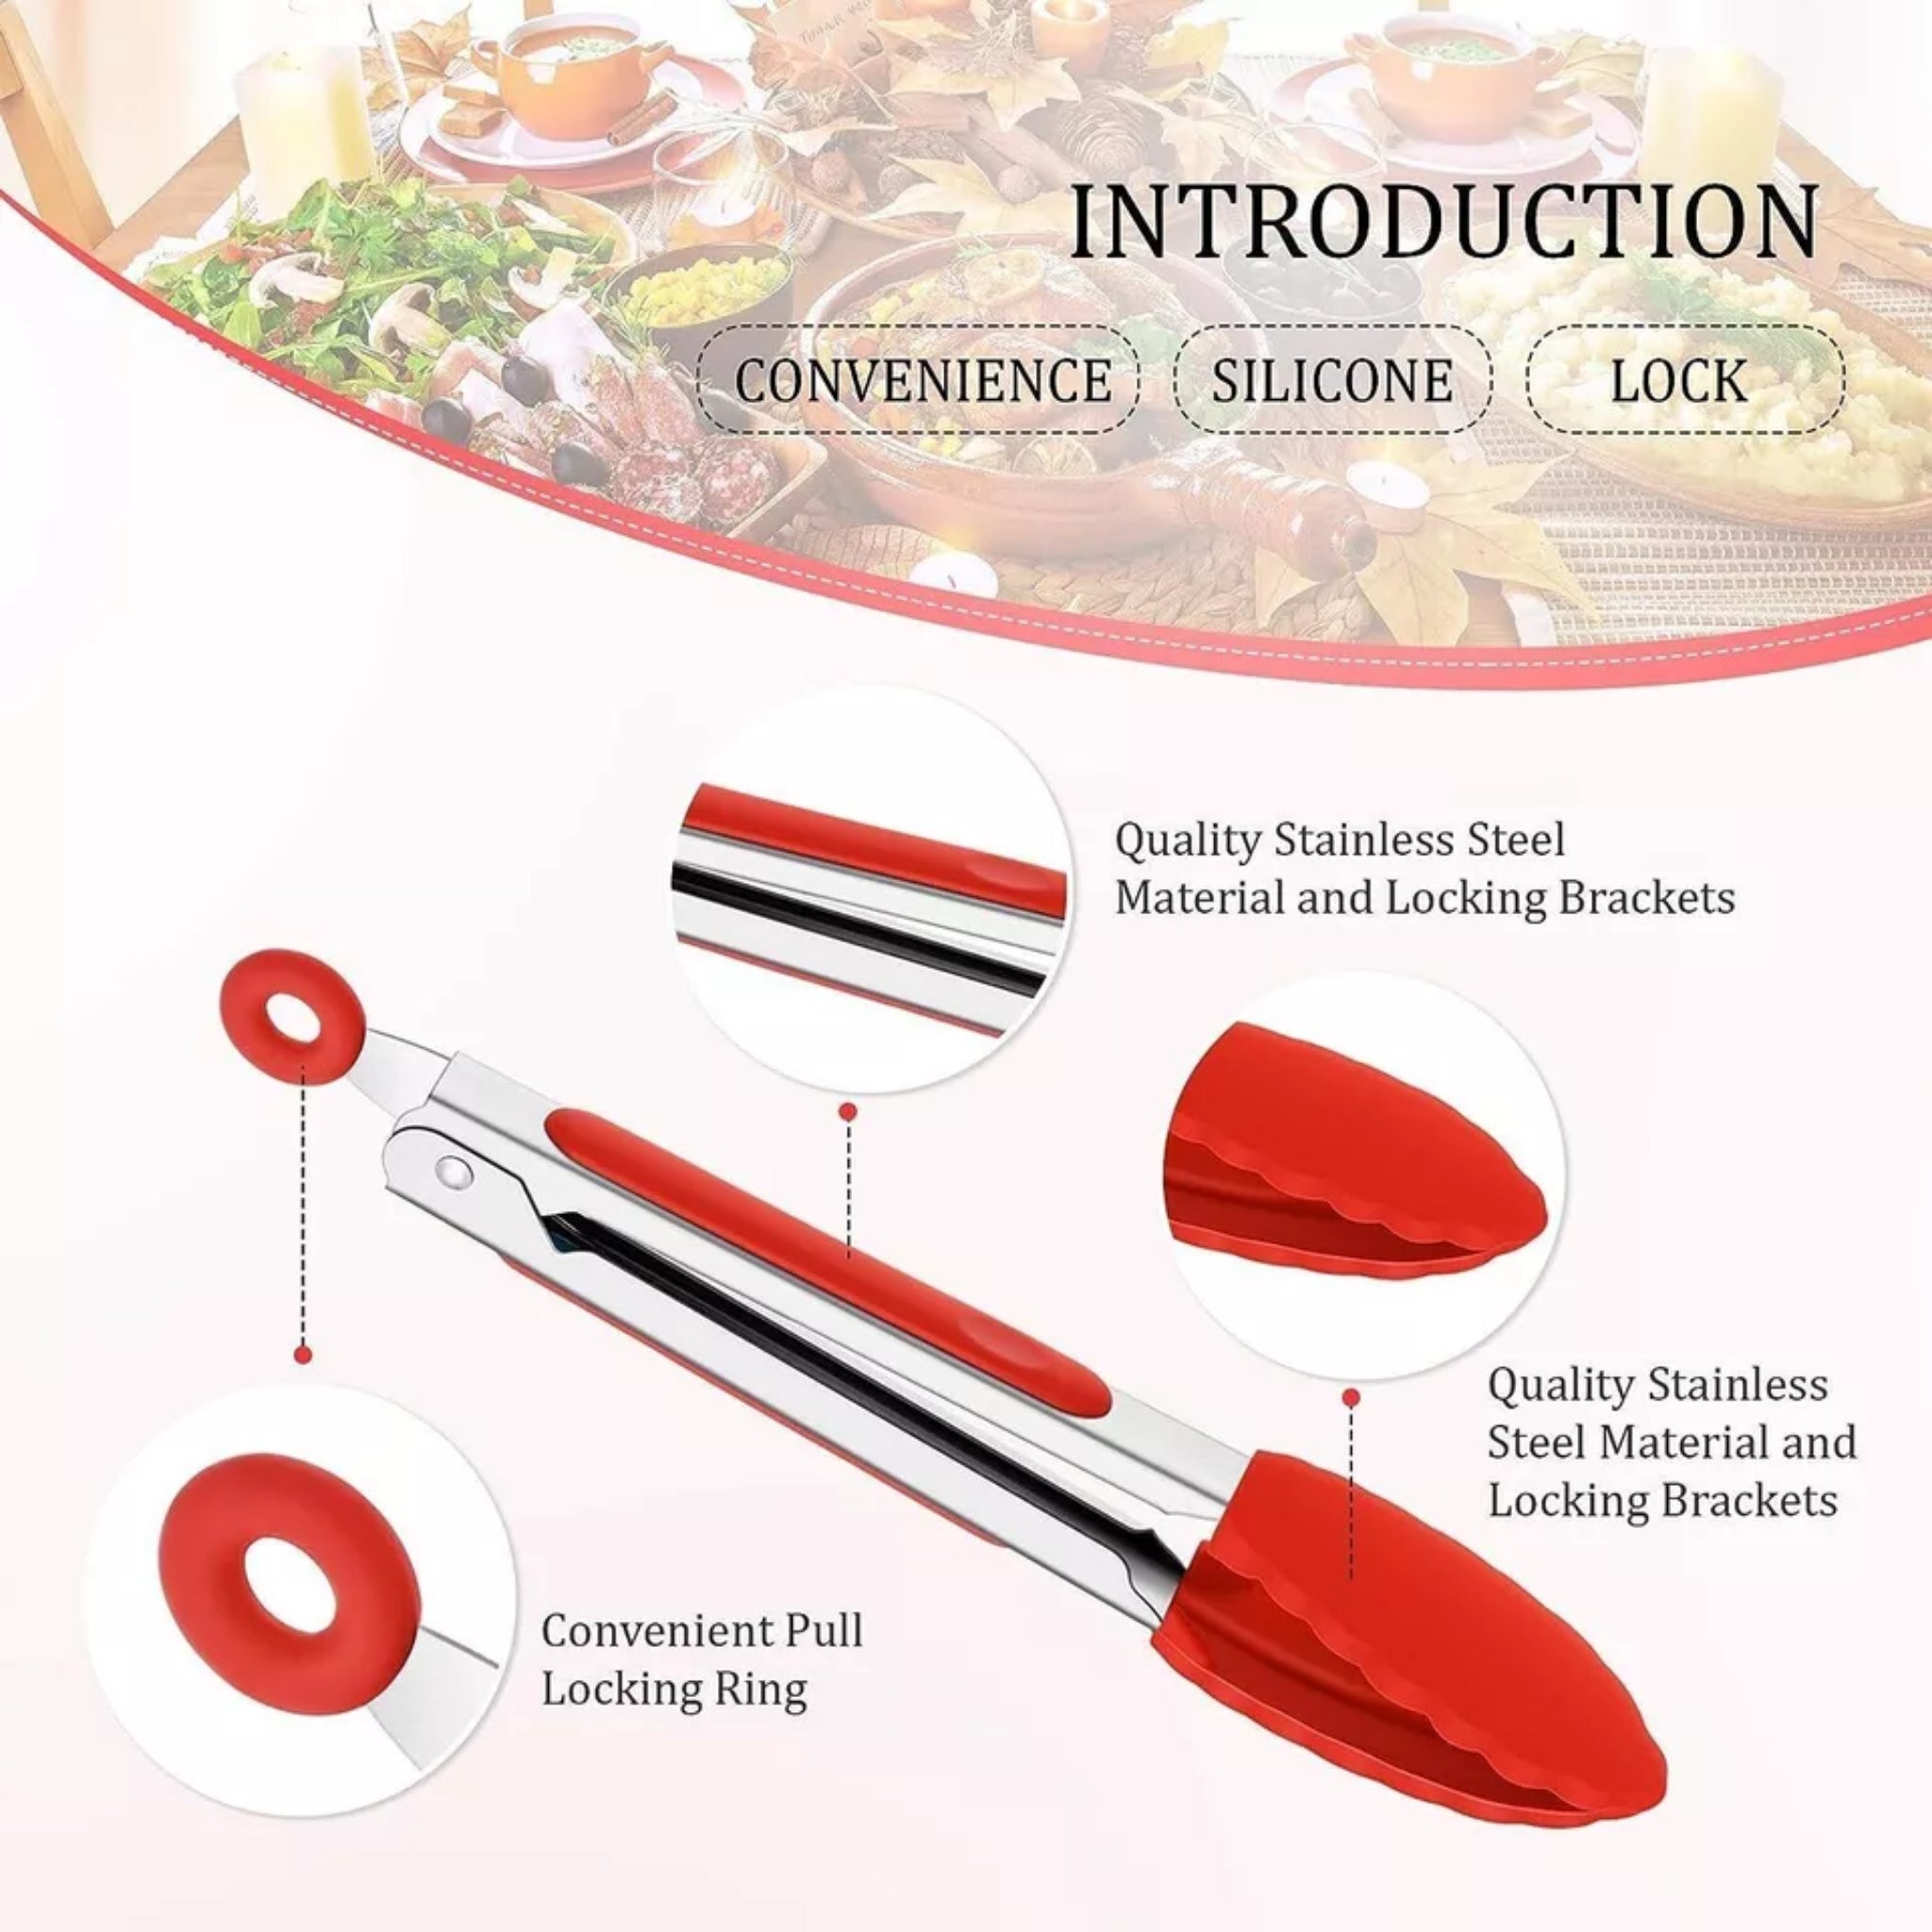 Beclen Harp 3pc Silicone Kitchen Cooking Salad Serving BBQ Tong Stainless Steel Utensil Set